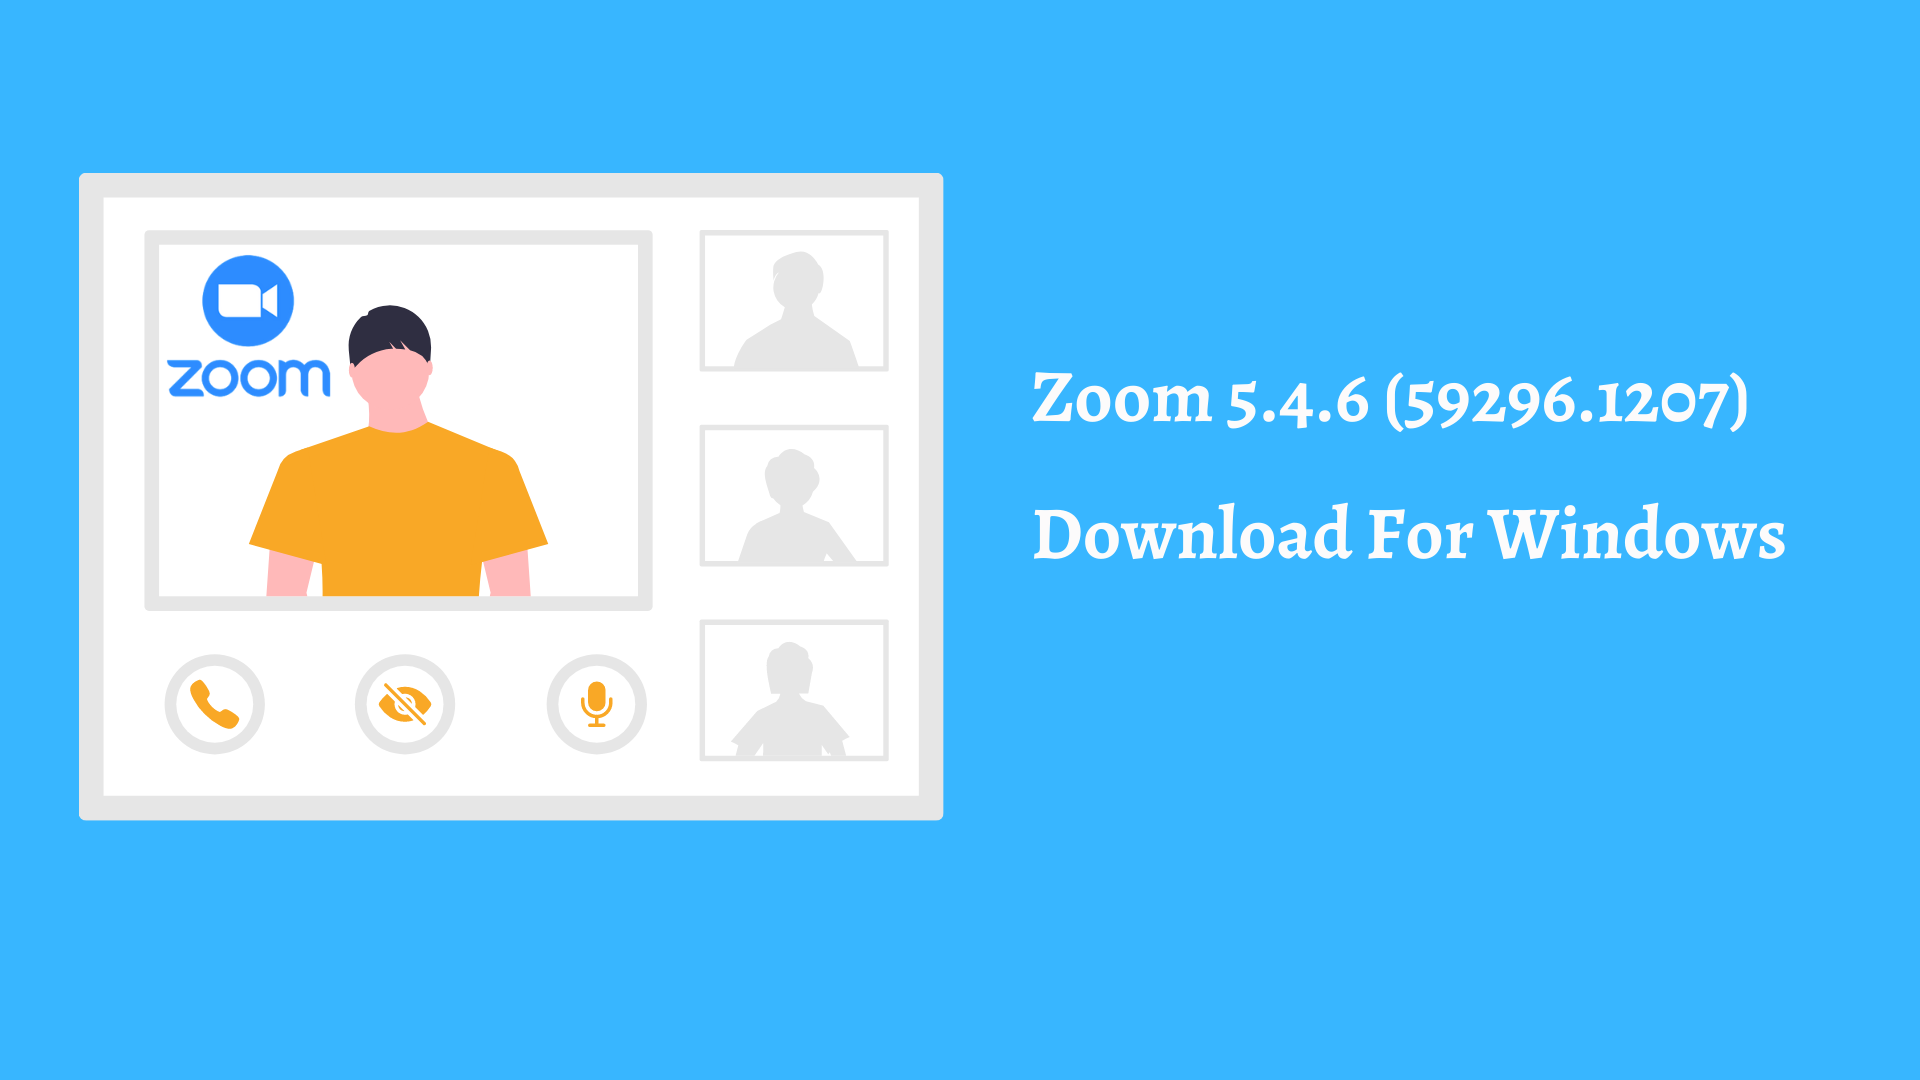 Zoom 5.4.6 (59296.1207) Download For Windows